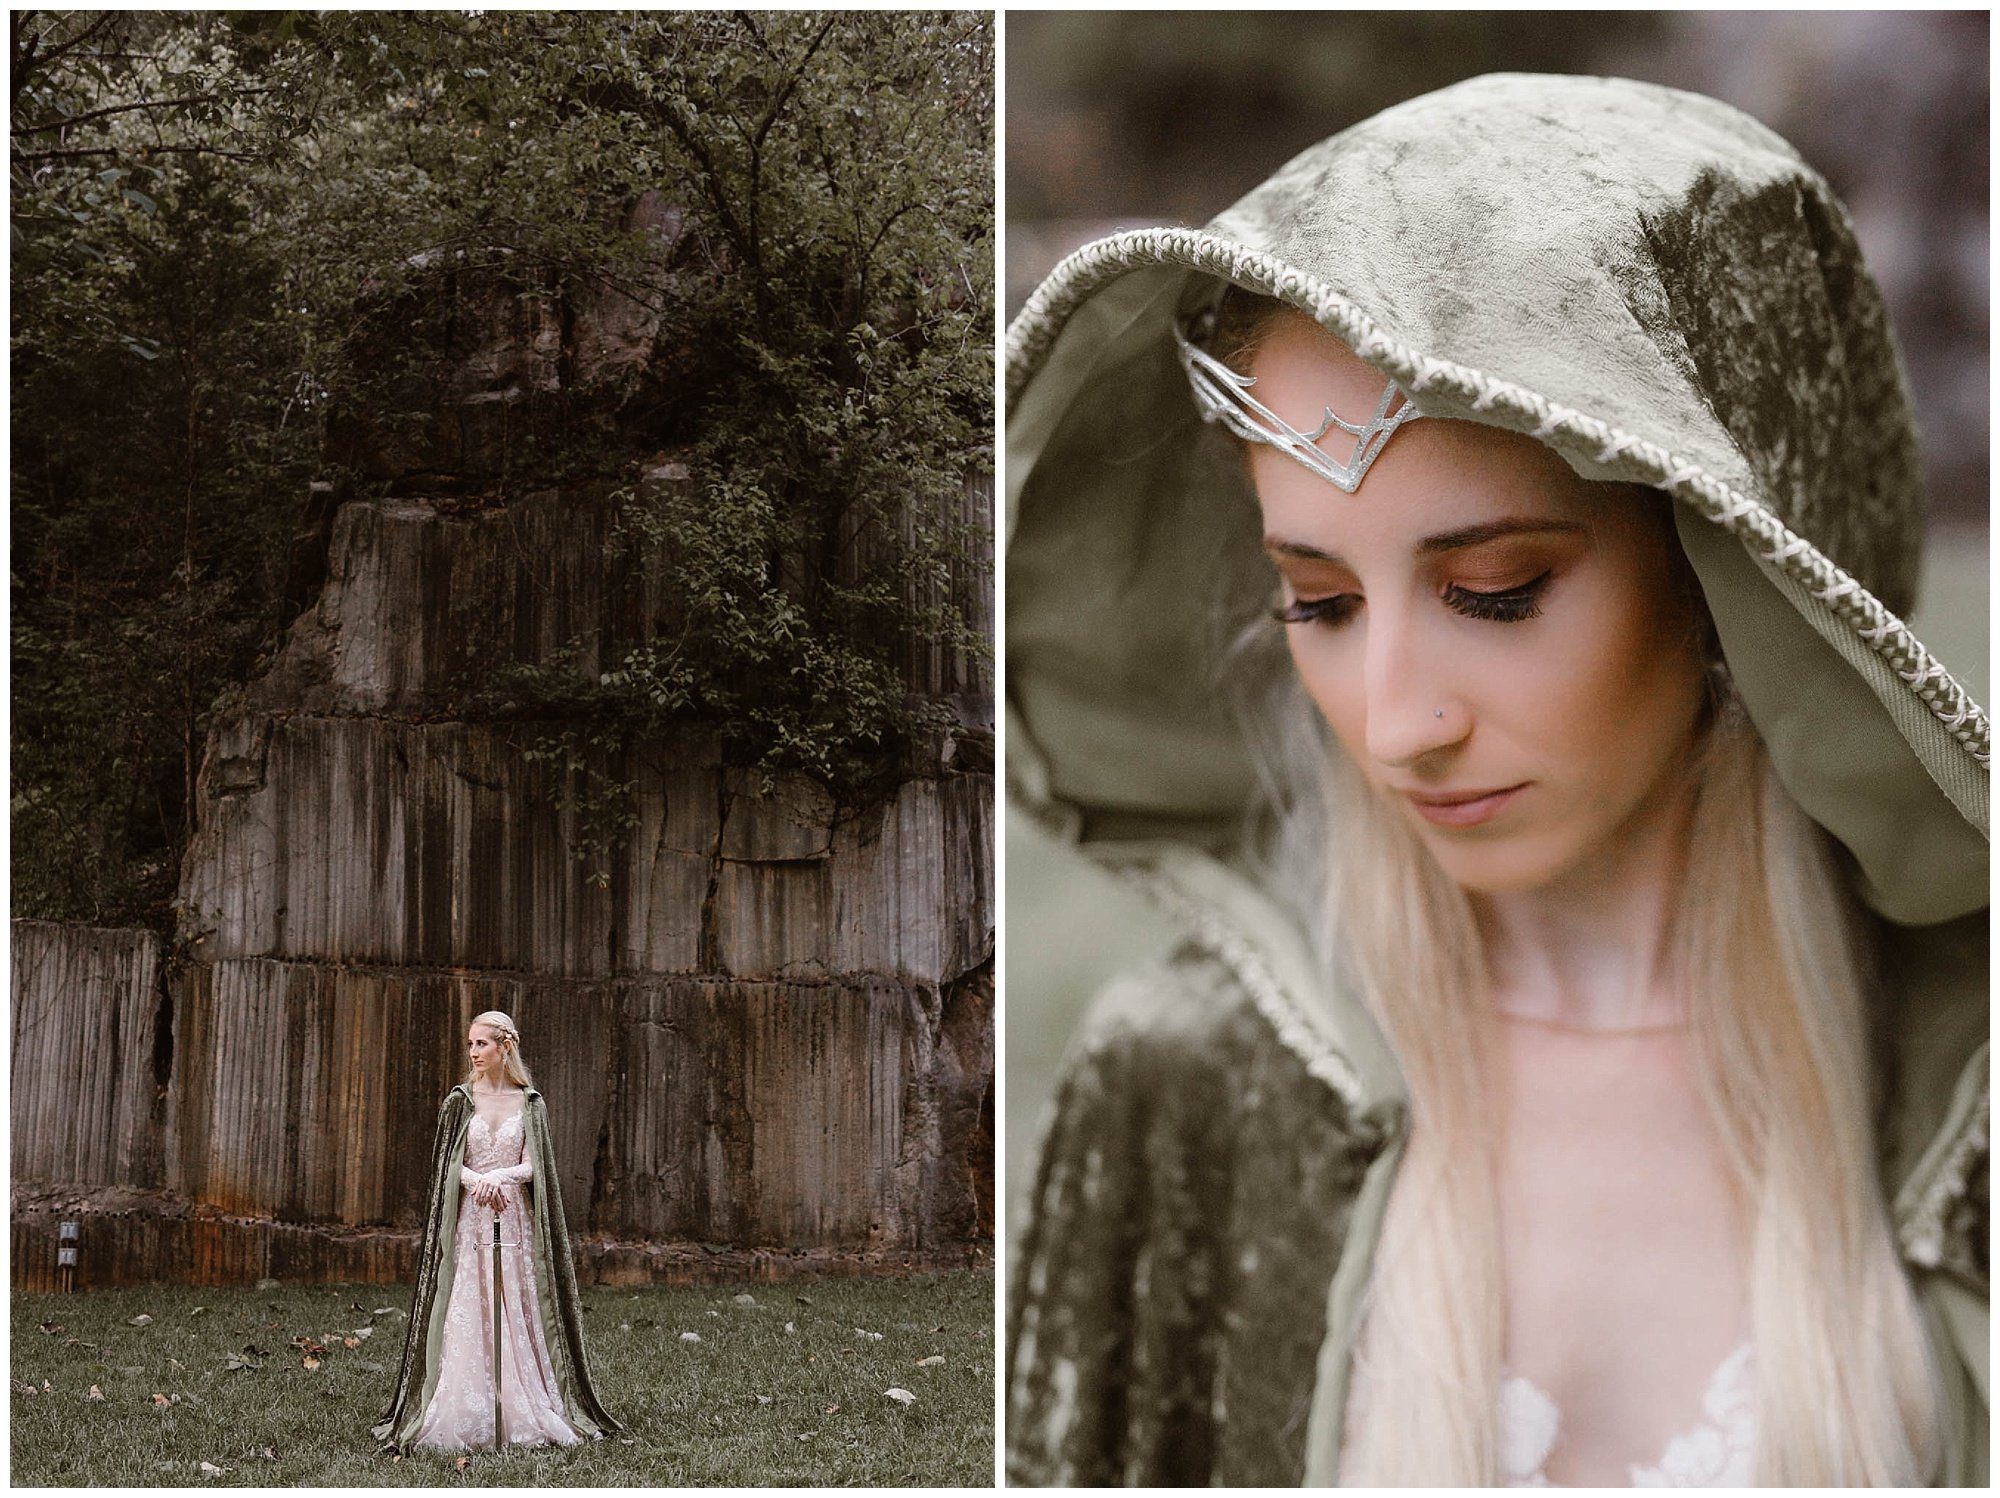 Game of Thrones Bridal Photos at The Quarry Venue Knoxville